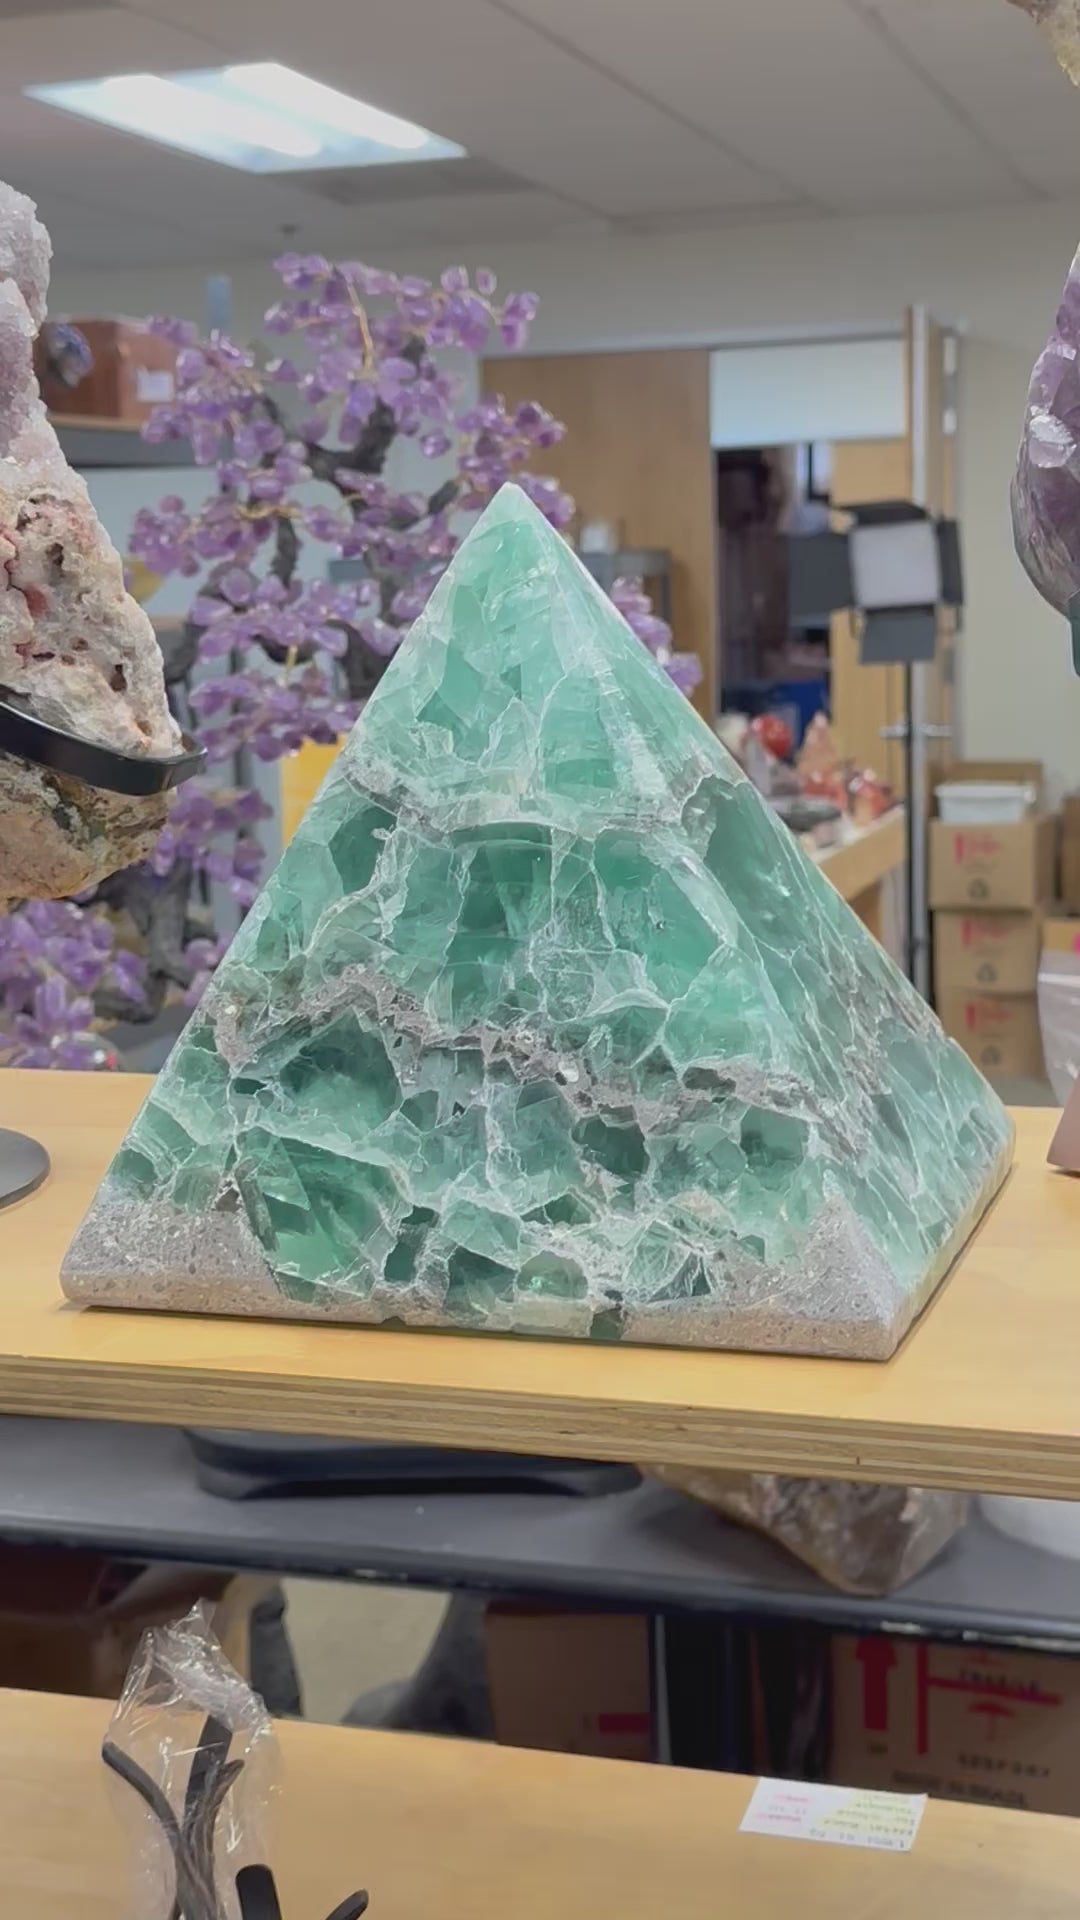 video of a large fluorite pyramid on a shelf.